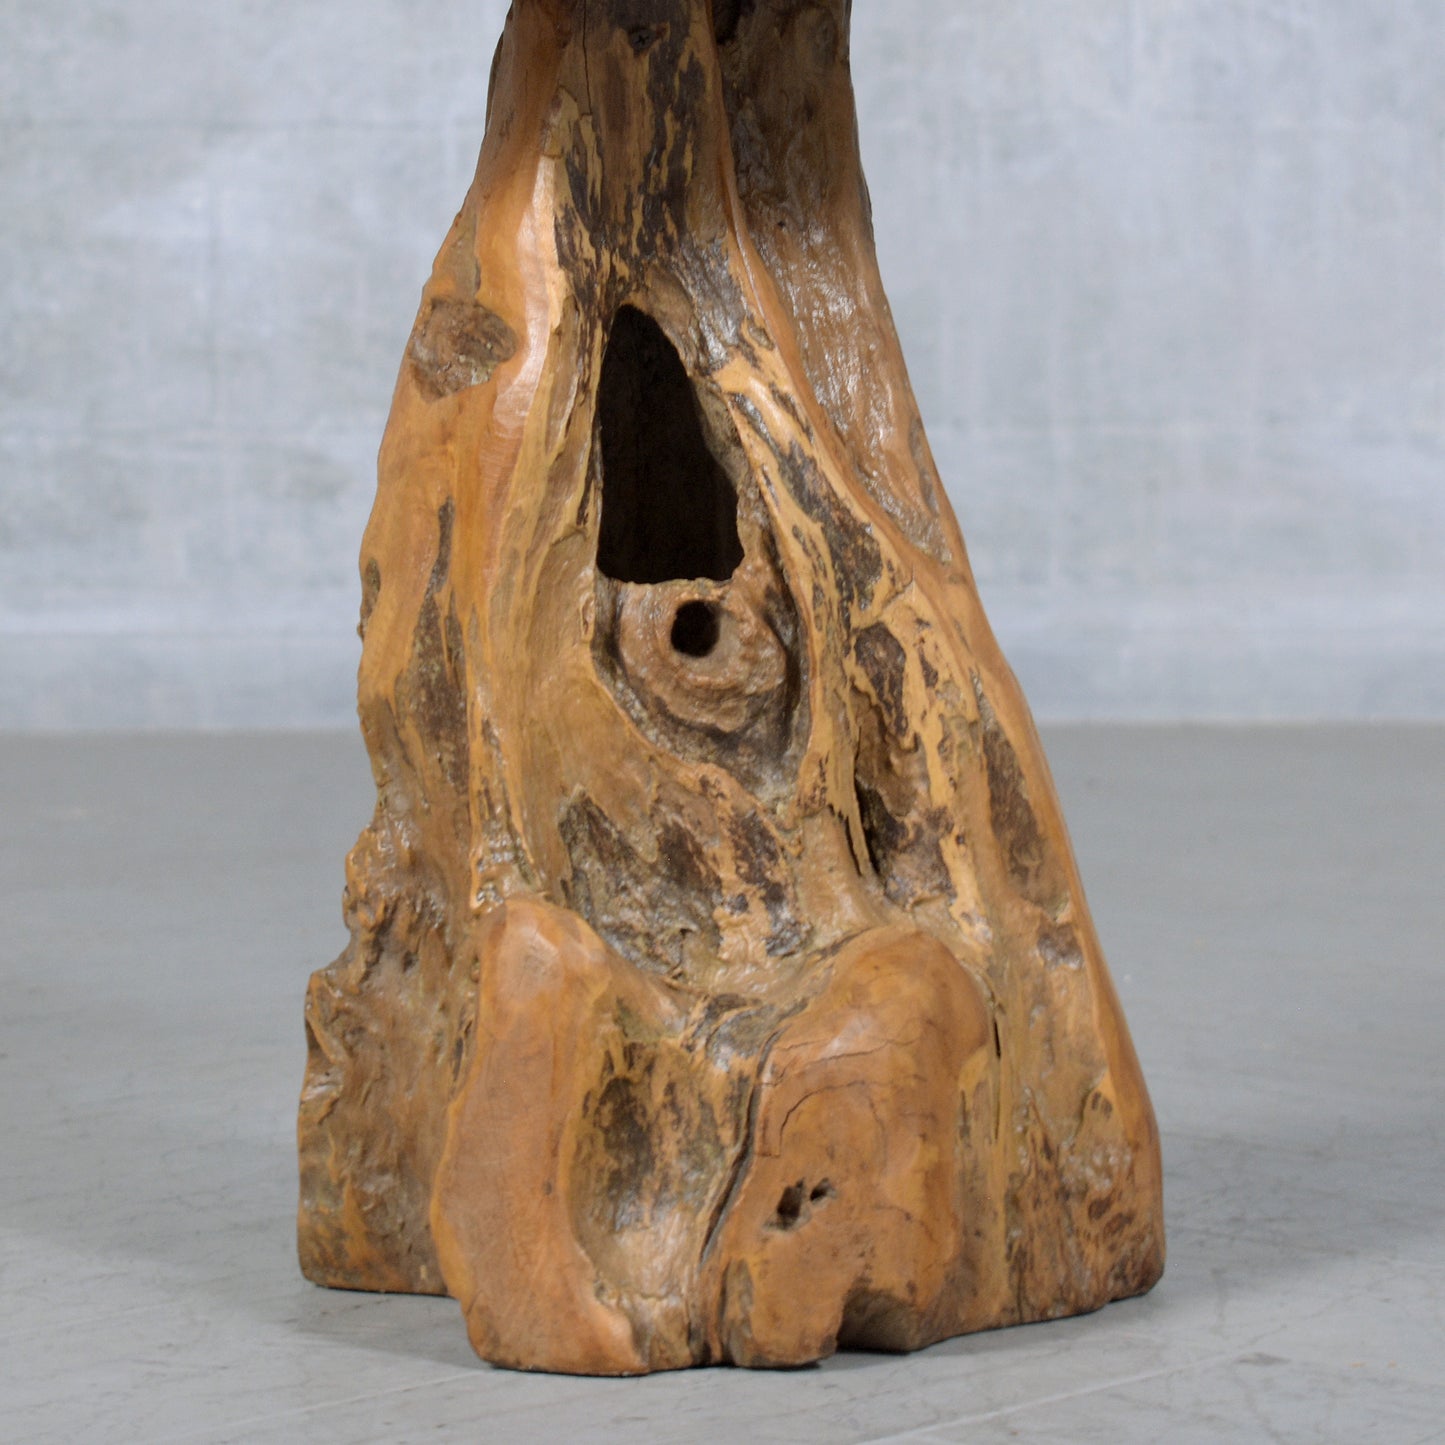 Organic Free Form Modern Root Side Table